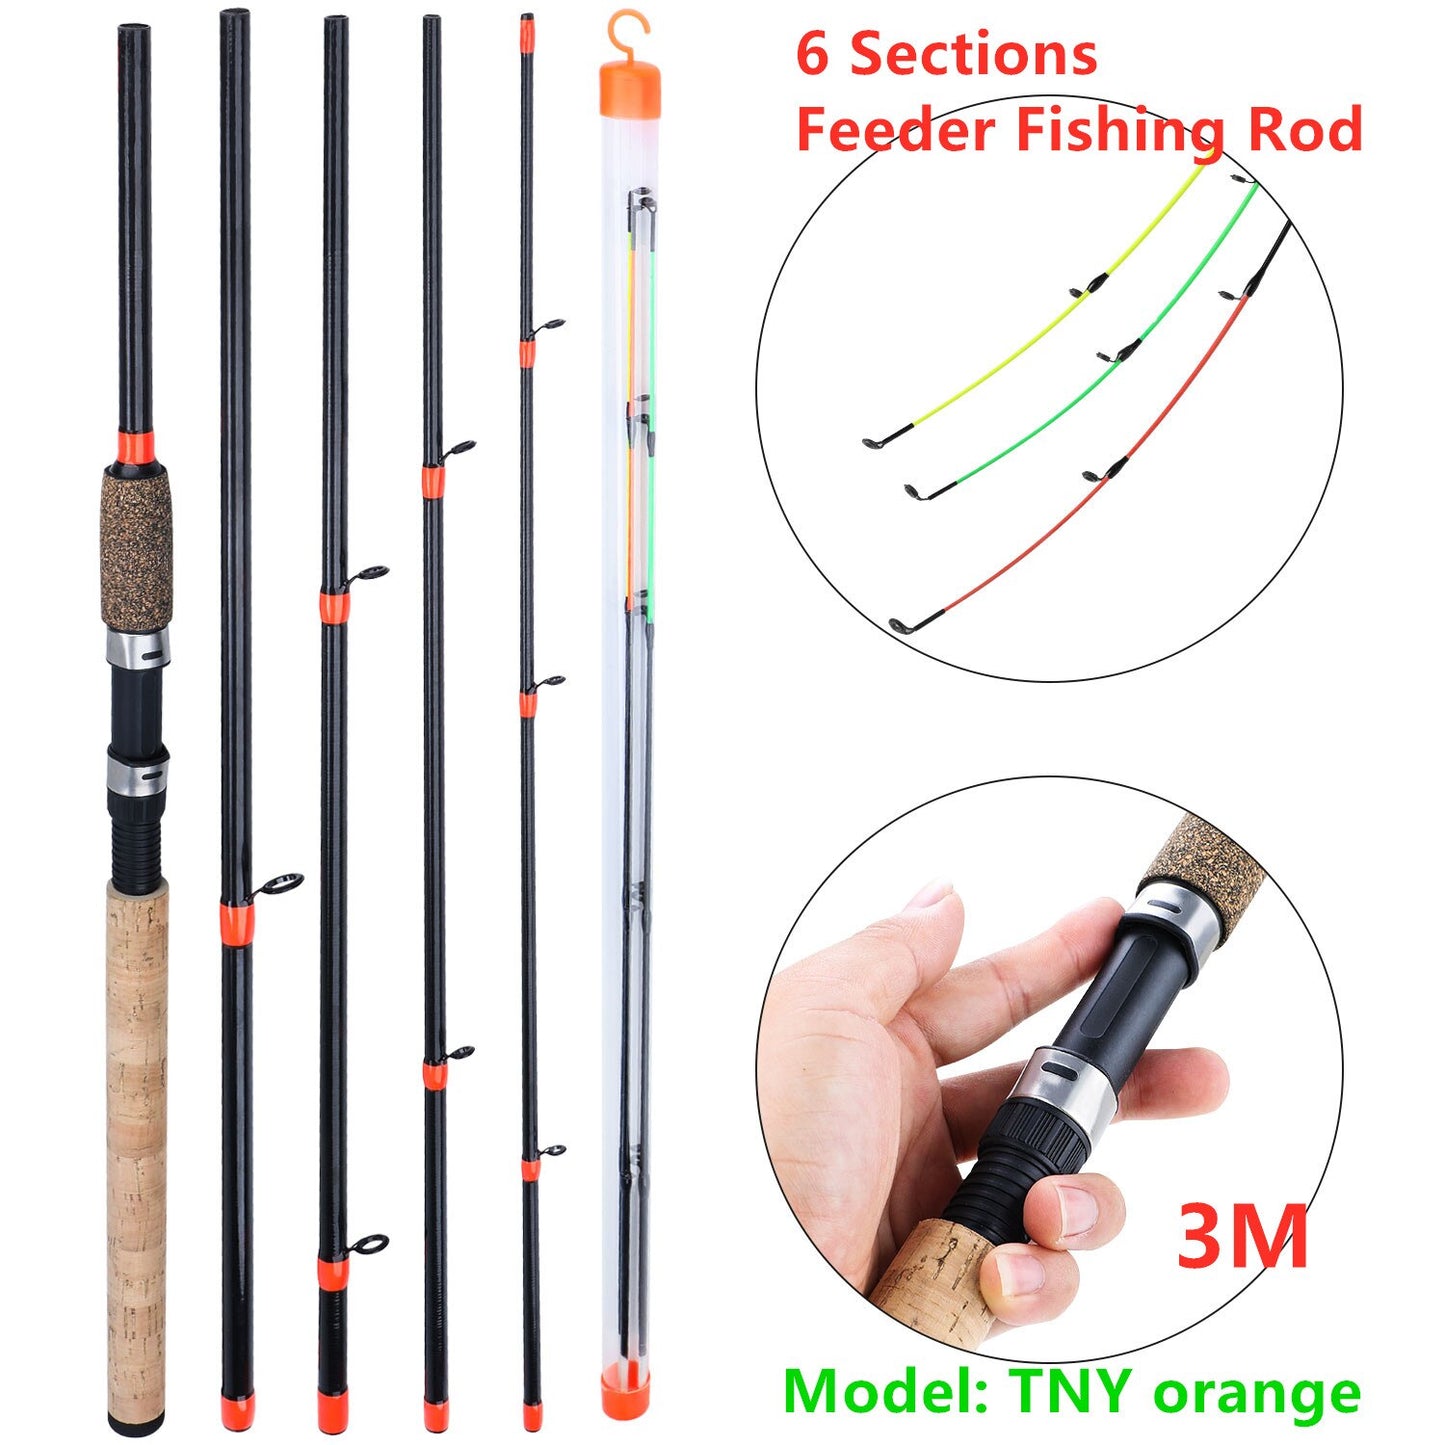 Sougayilang L M H Power Feeder Fishing Rod Spinning /6 Sections Carbon Fiber Travel Rod 3.0M 3.3M 3.6M With Free Spare Tip